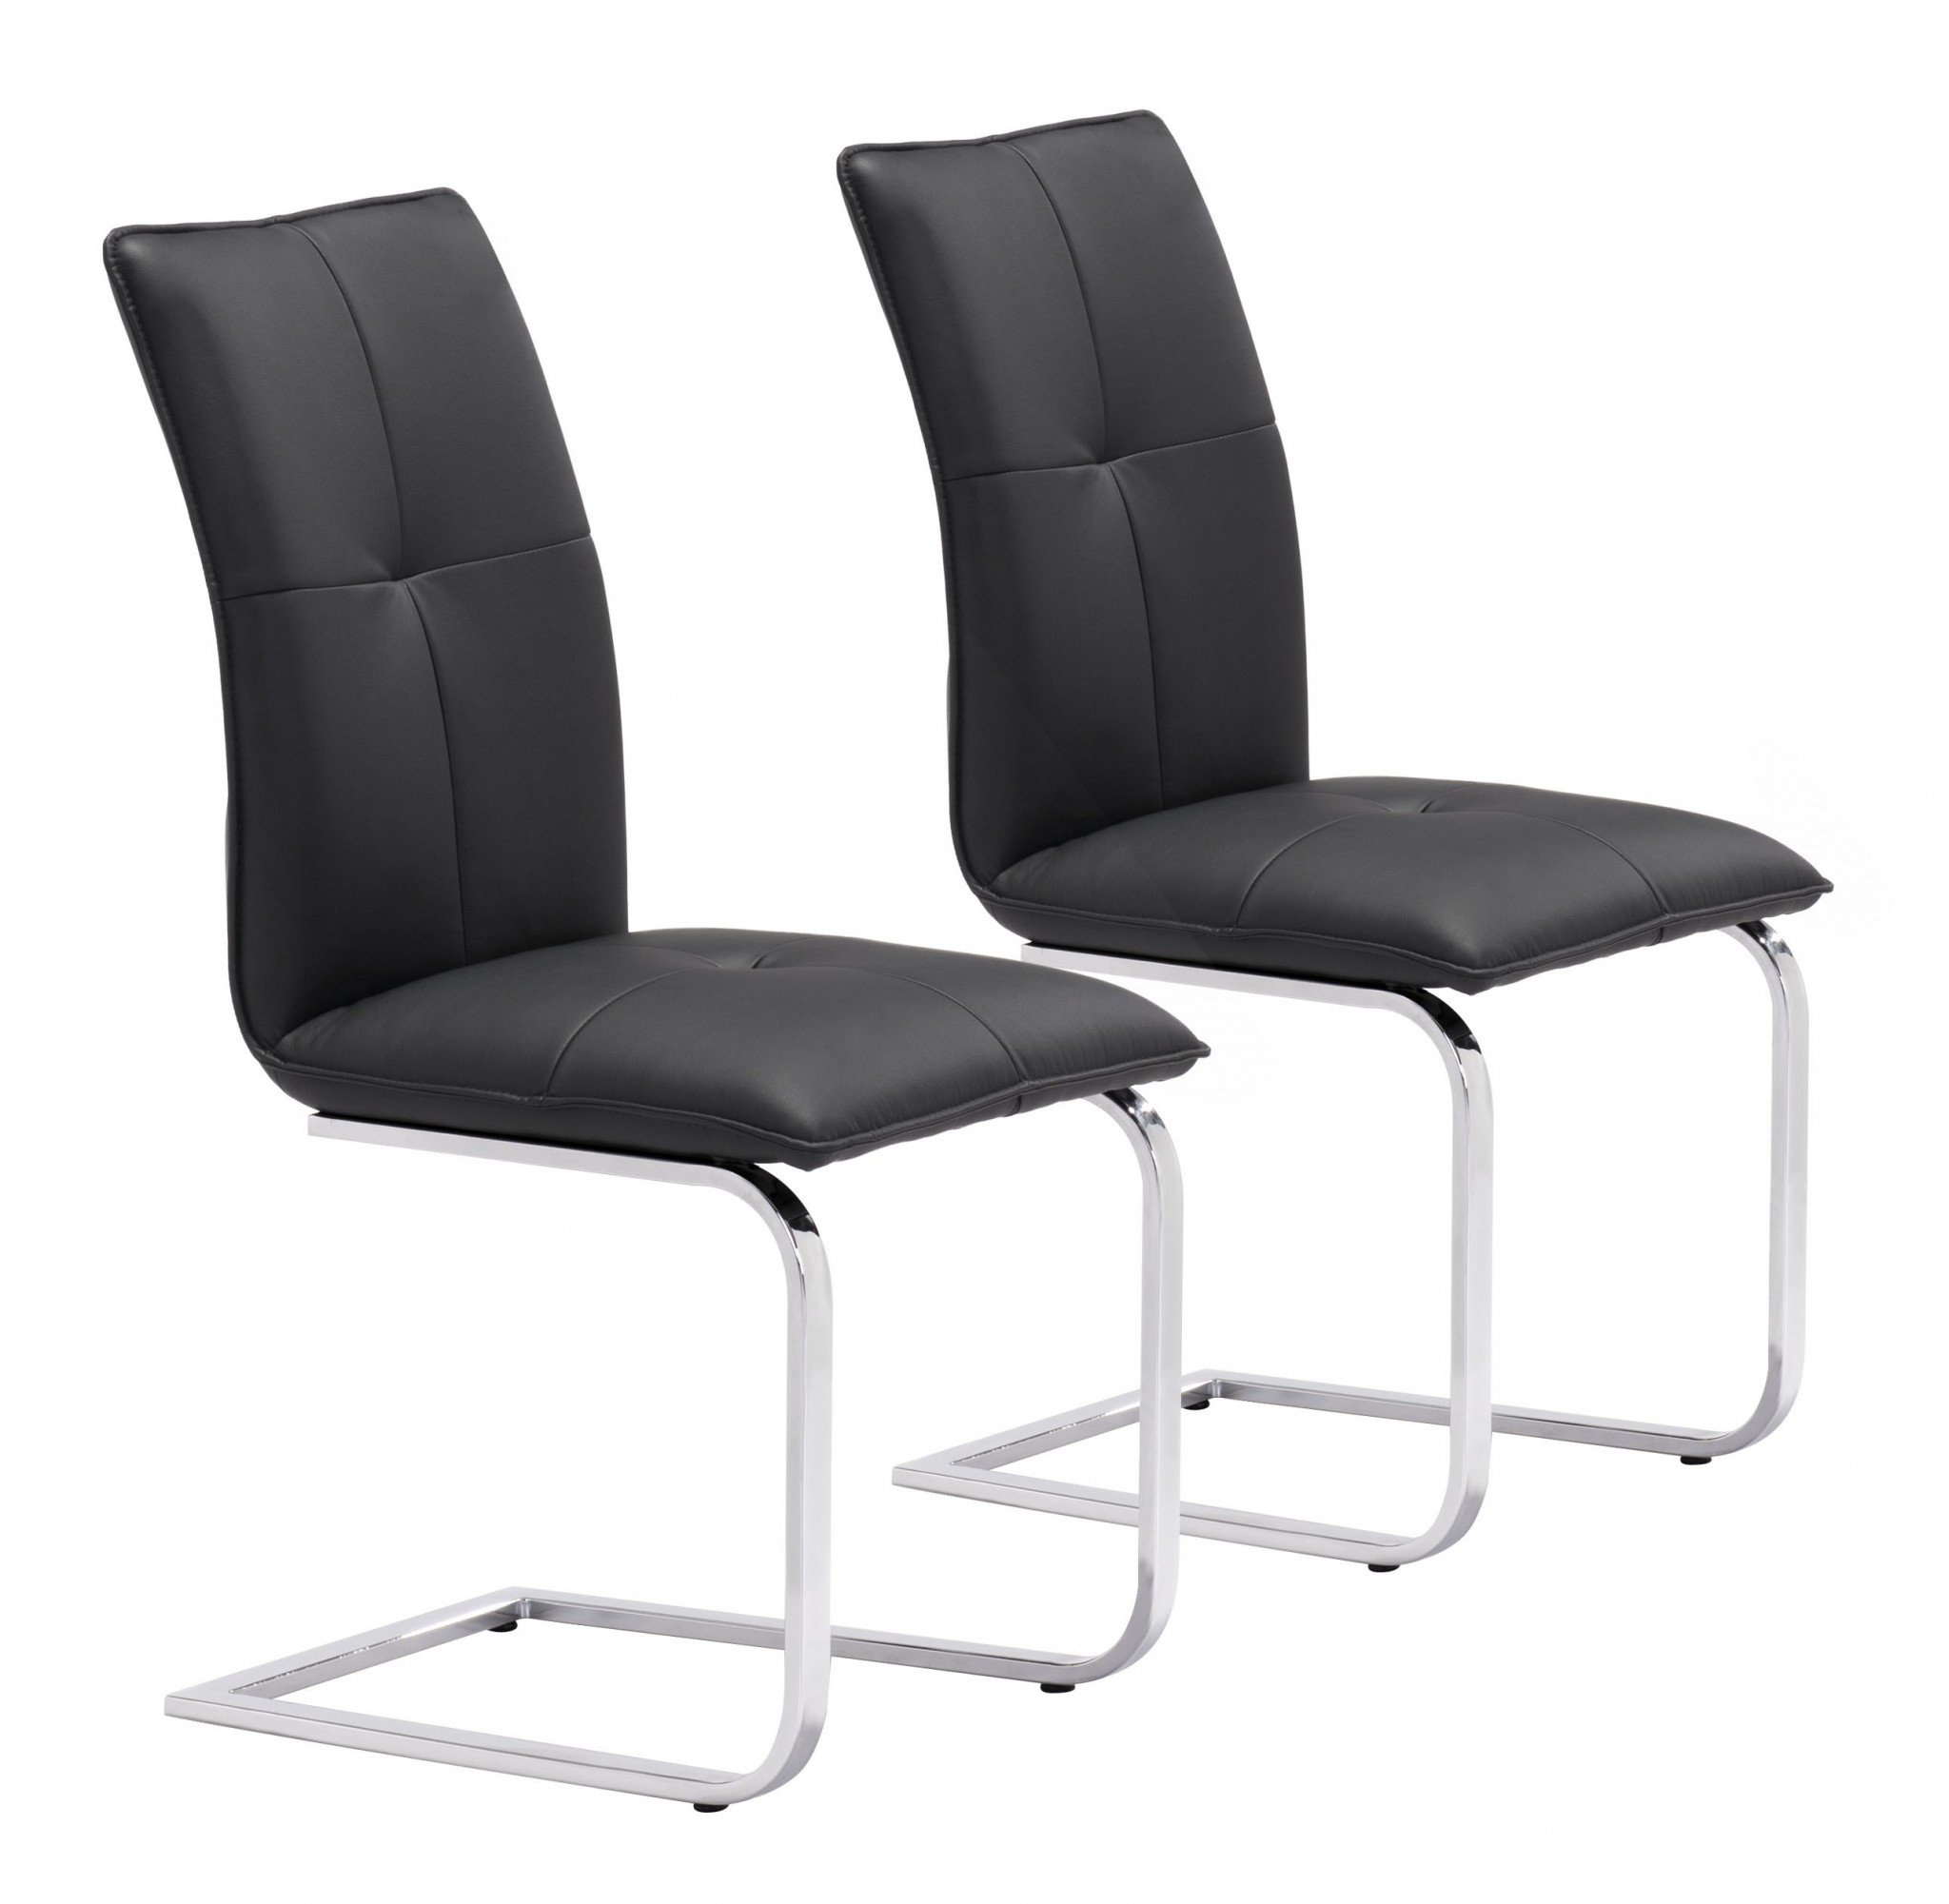 Set of Two Black Faux Leather and Chrome Contempo Comfy Dining Chairs